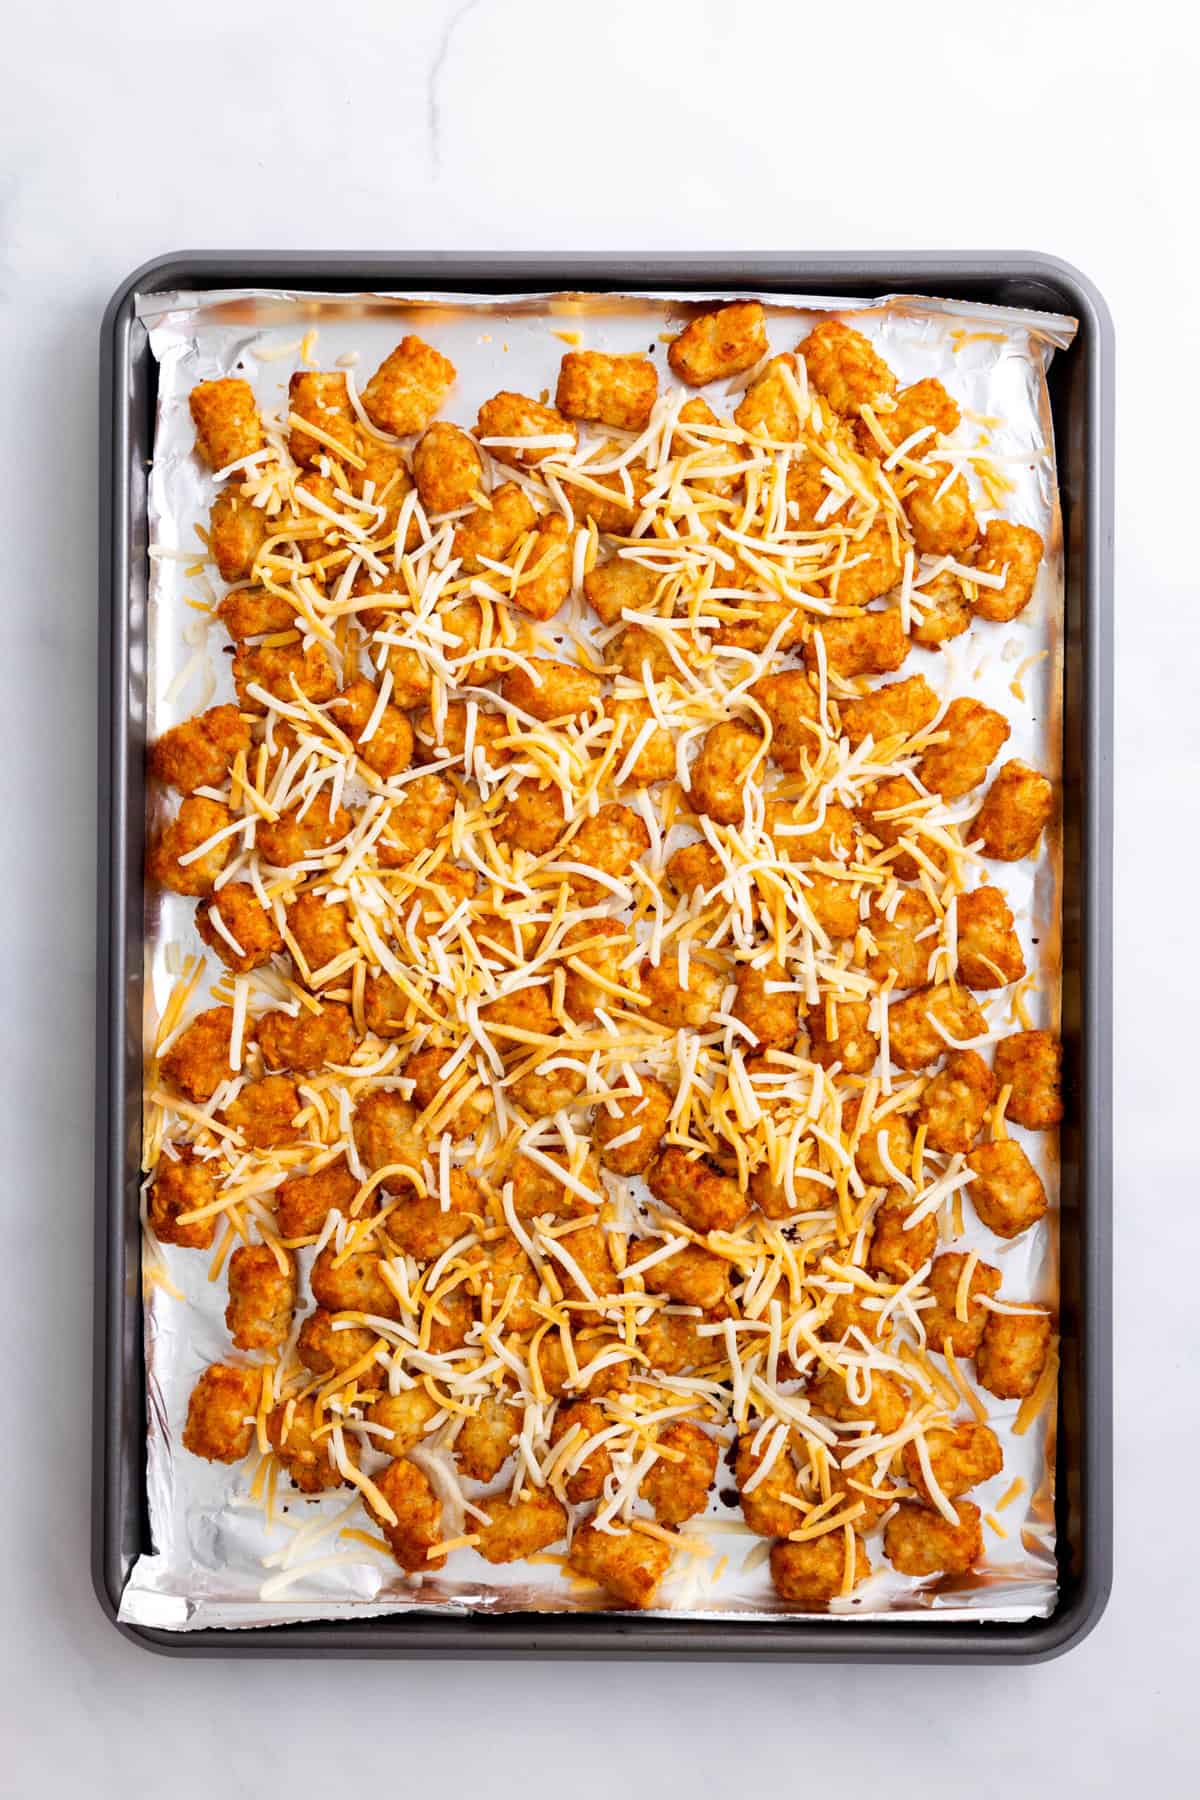 step 2 to make loaded tater tots, sprinkle shredded cheese over the tater tots